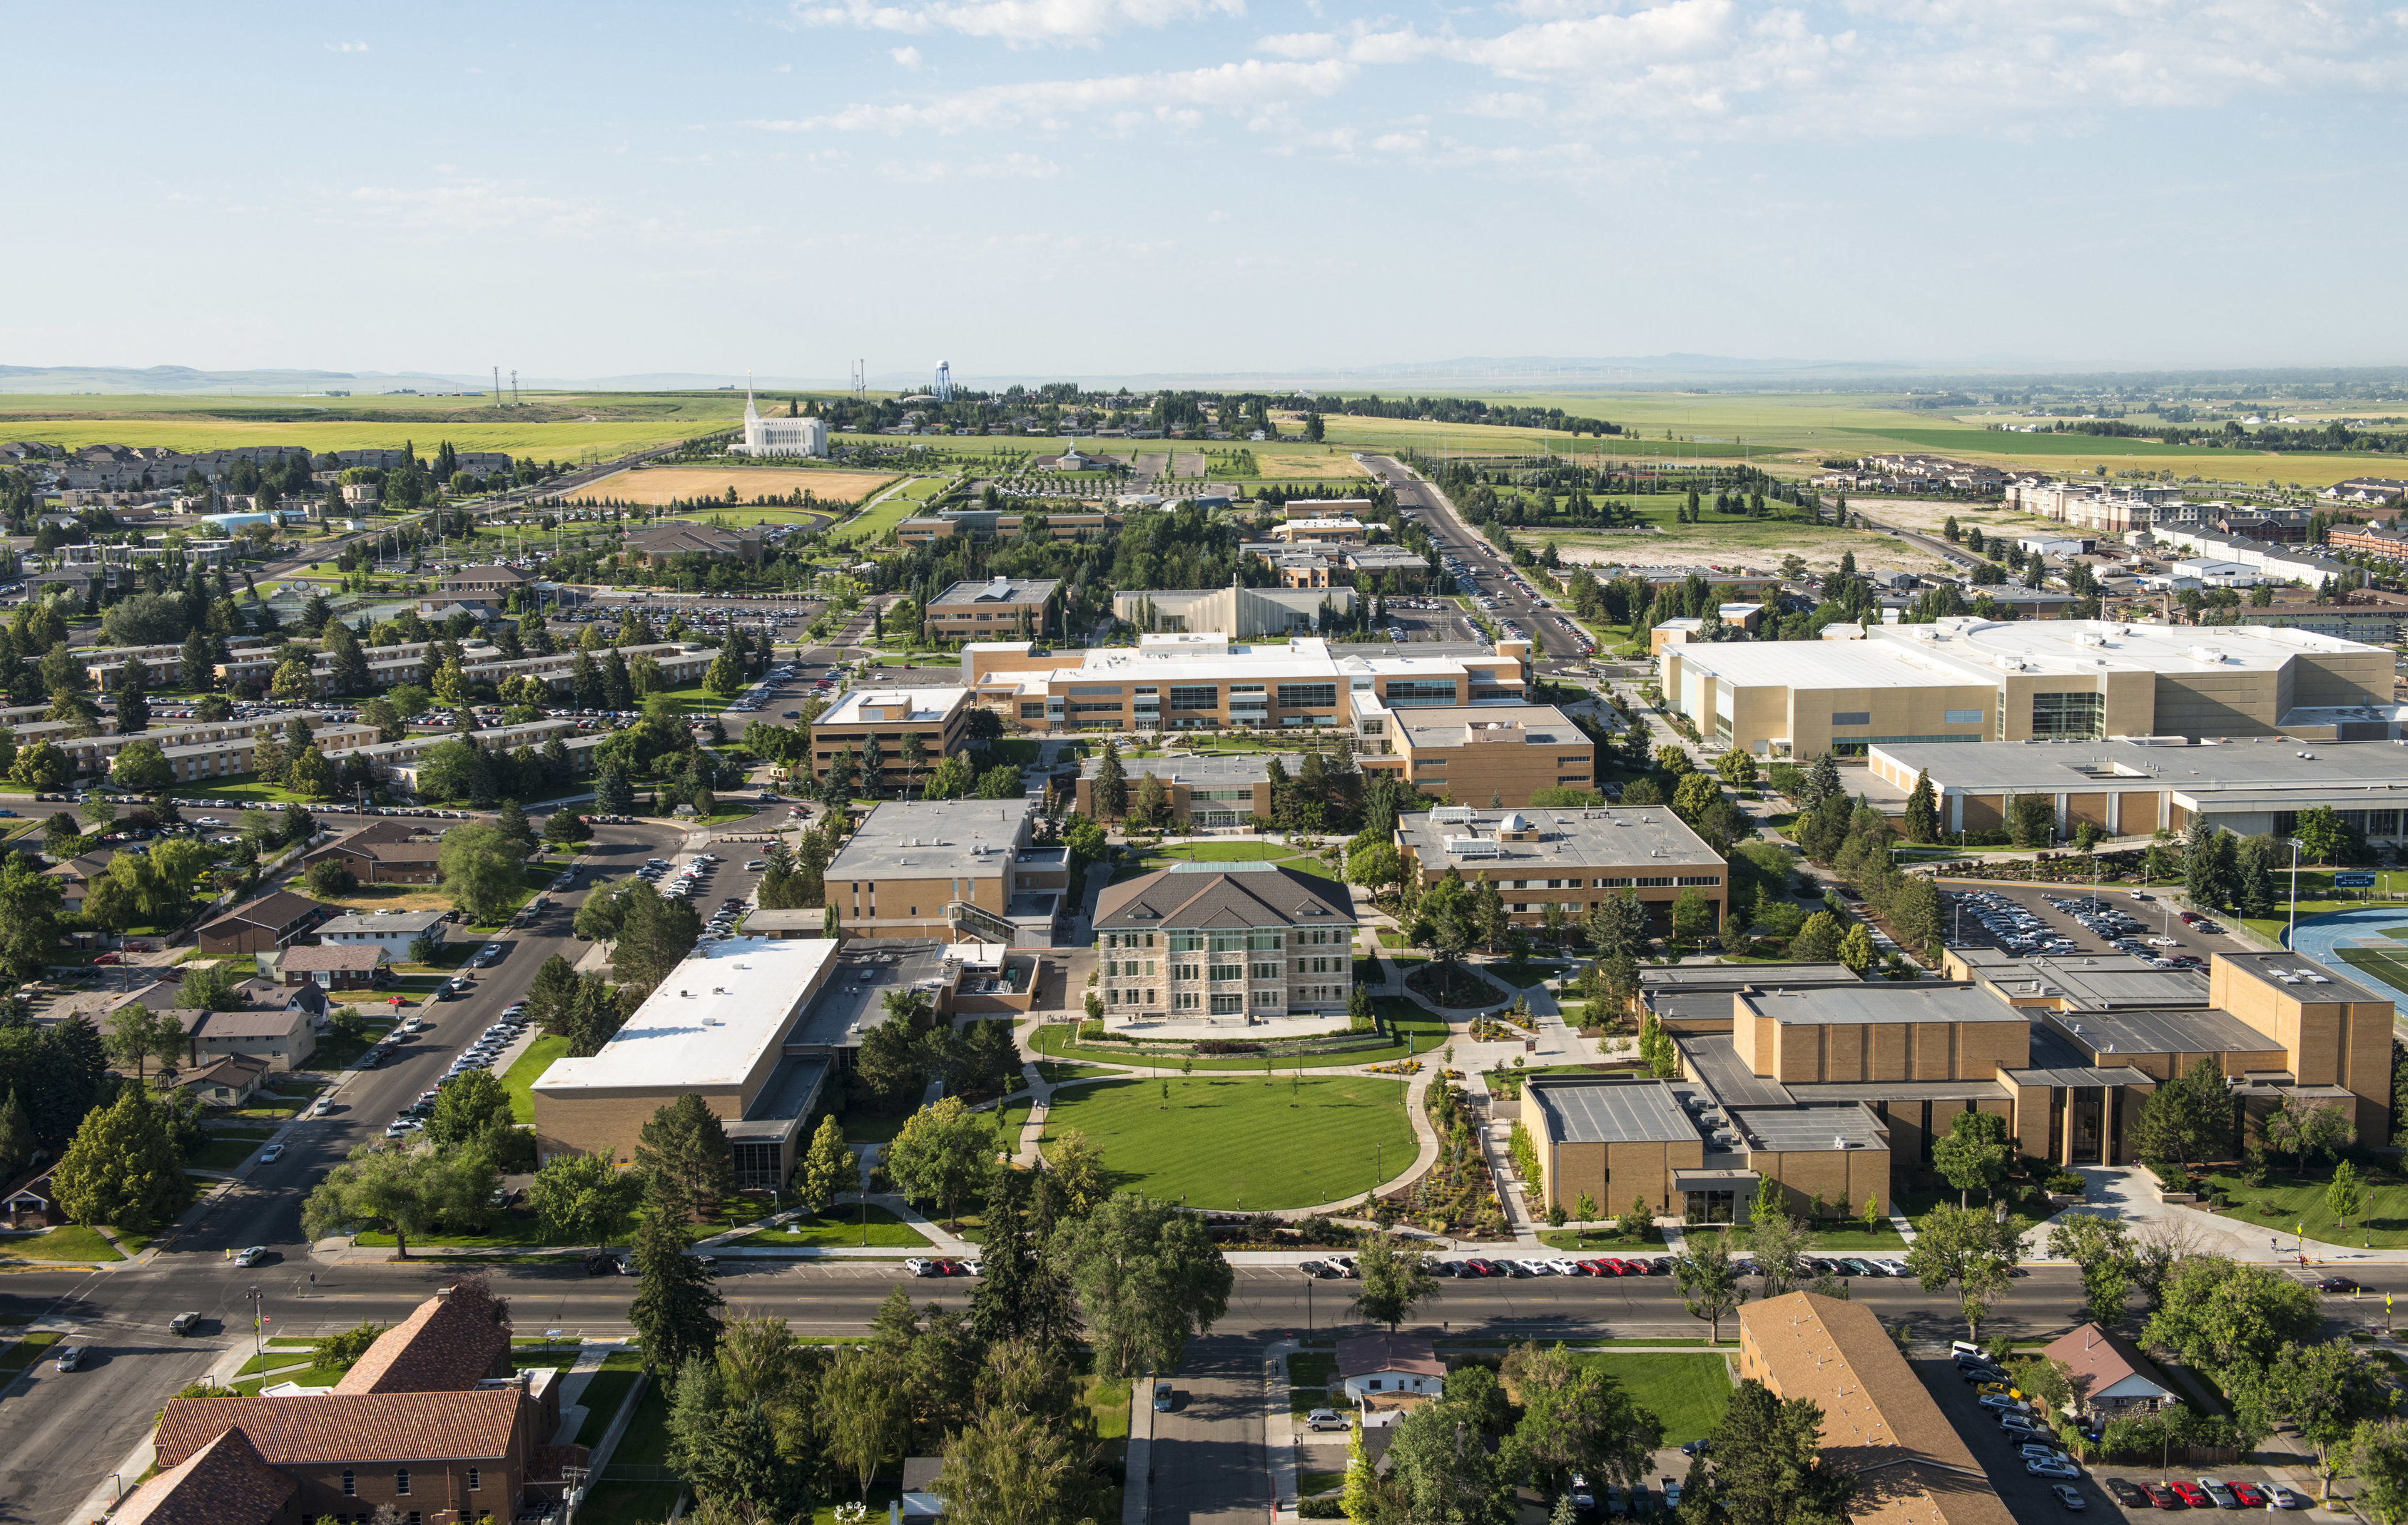 Aerial photo of the city of Rexburg located in Eastern, ID